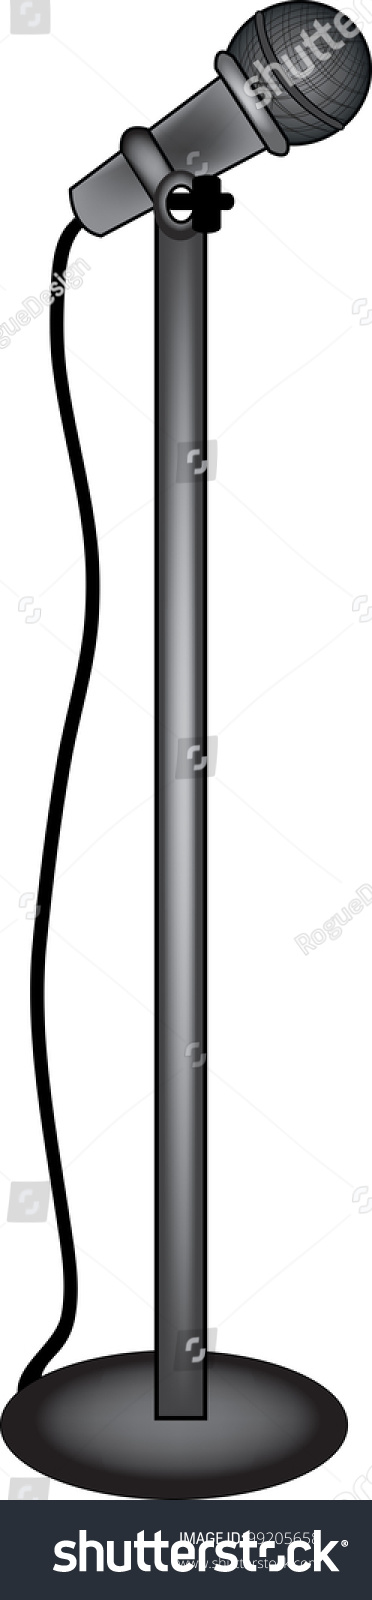 Clipart Microphone Stand & Free Clip Art Images #19425.